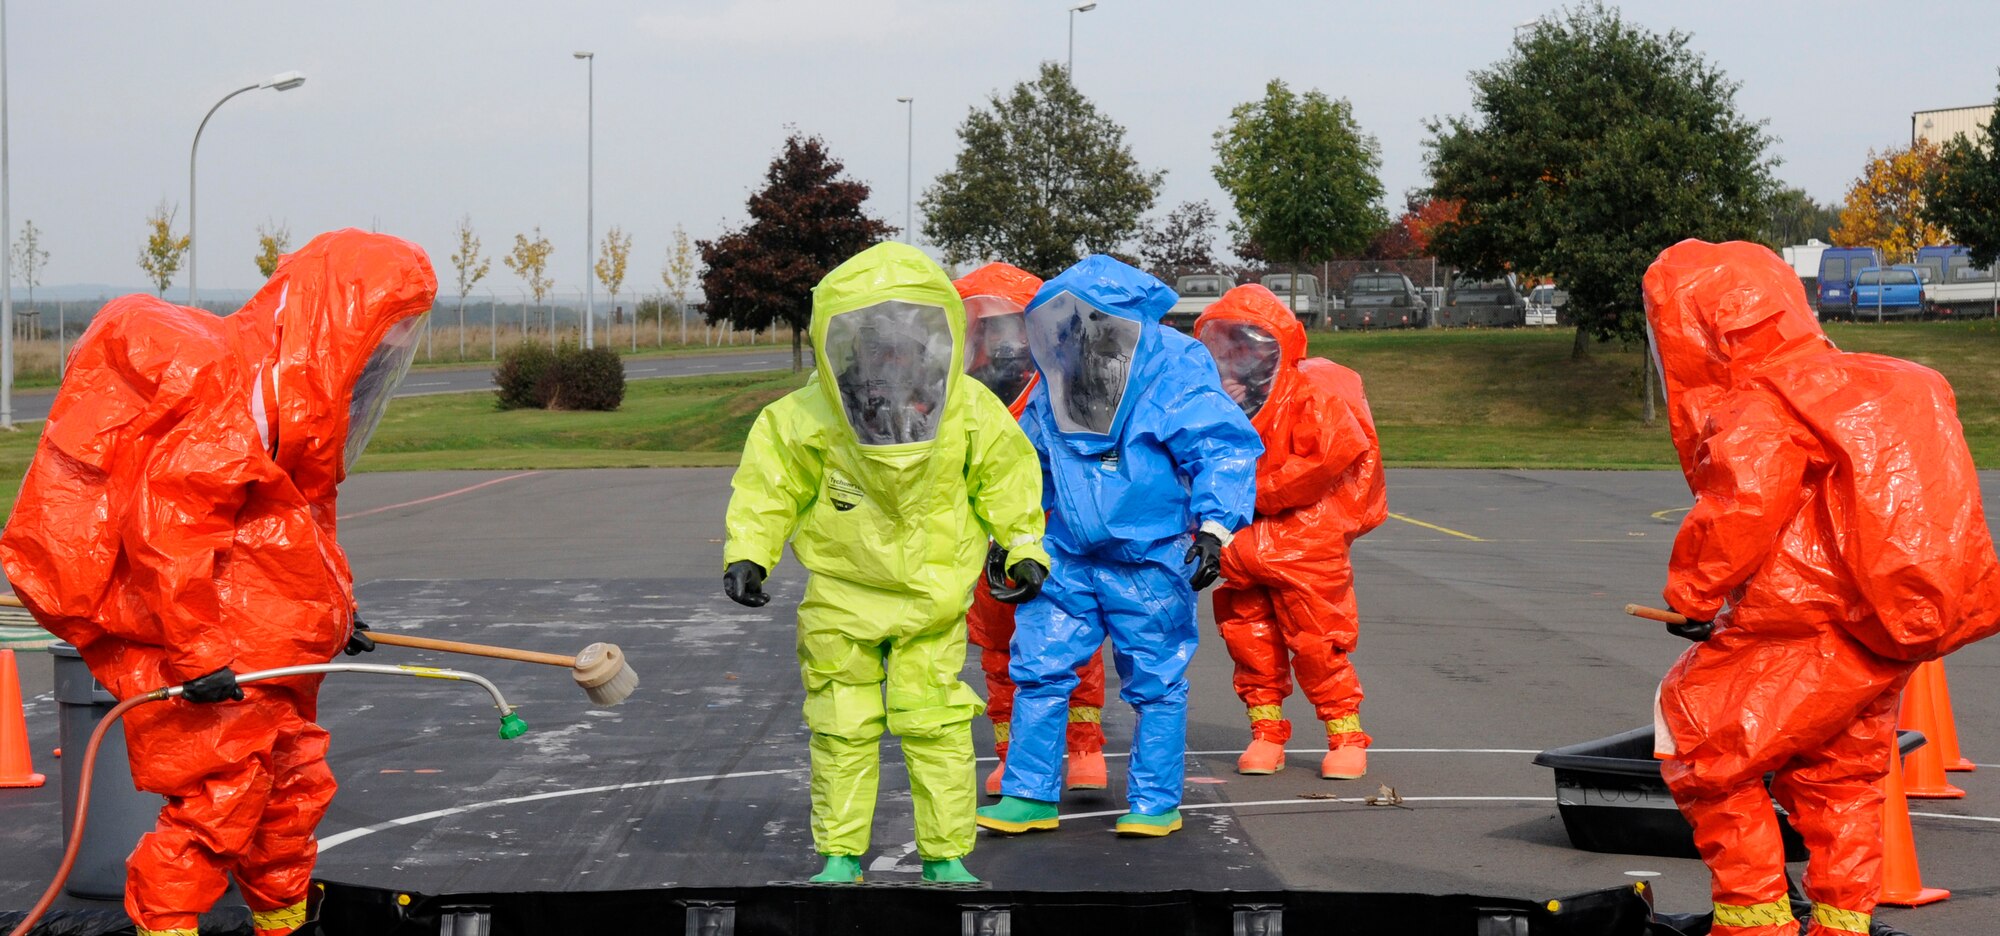 SPANGDAHLEM AIR BASE, Germany – Members from the Full-Spectrum Threat Response Strike Team, 52nd Civil Engineer Squadron, line up to simulate body decontamination during an all hazards response training emergency management and mass casualty exercise Oct. 7. The teams maintained an "all hazards" mentality to provide accurate, real-world results. (U.S. Air Force photo/Airman 1st Class Staci Miller)